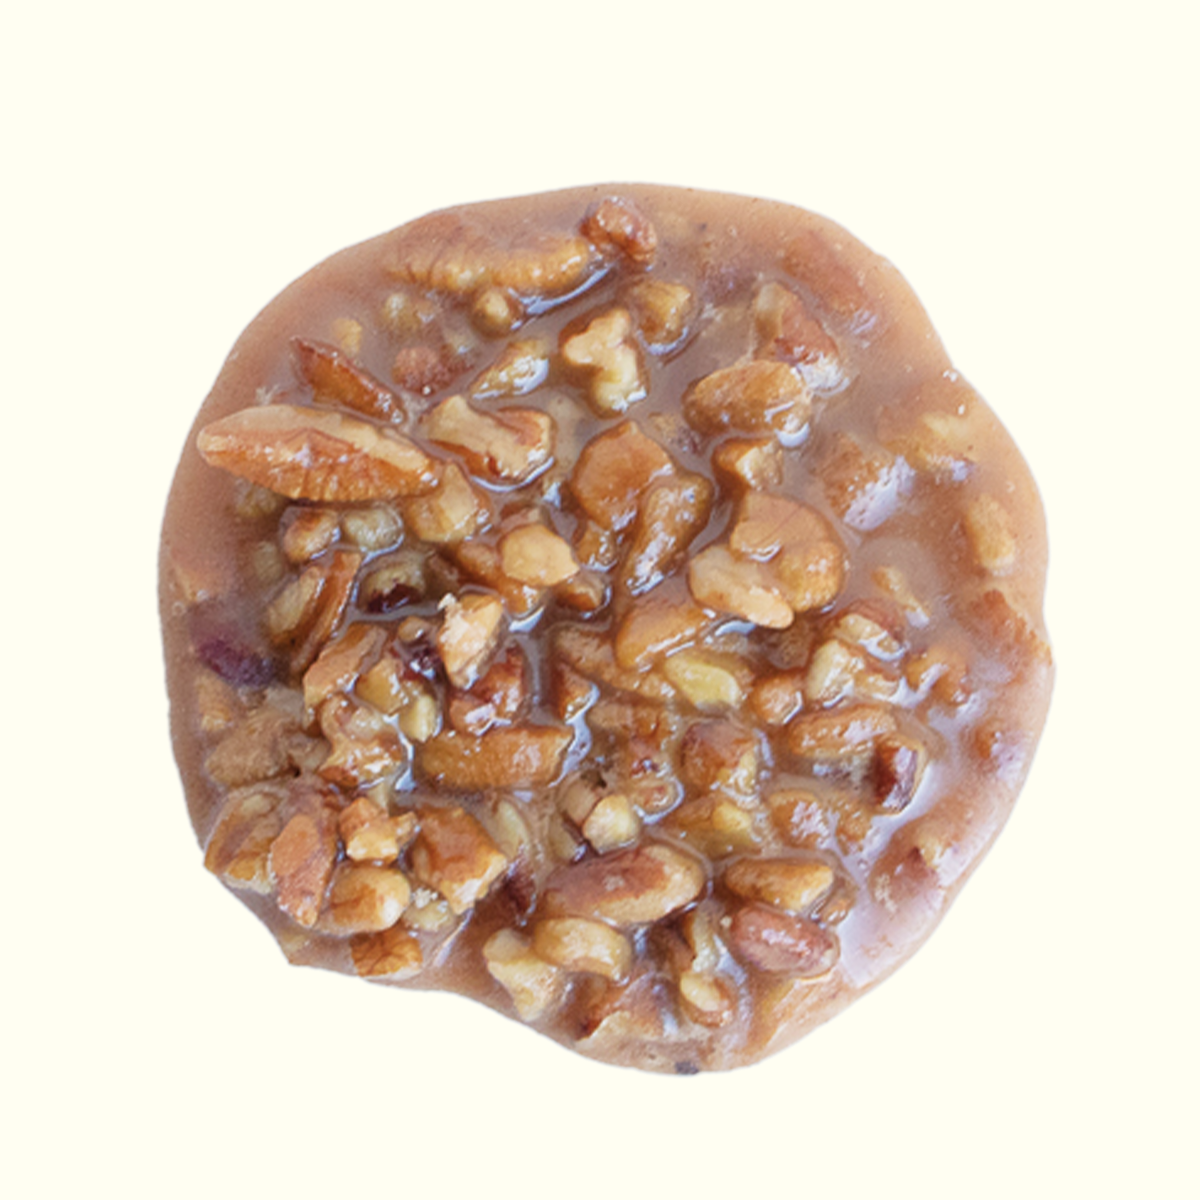 Aunt Sally's Pralines Original Praline single unwrapped enlarged to show texture